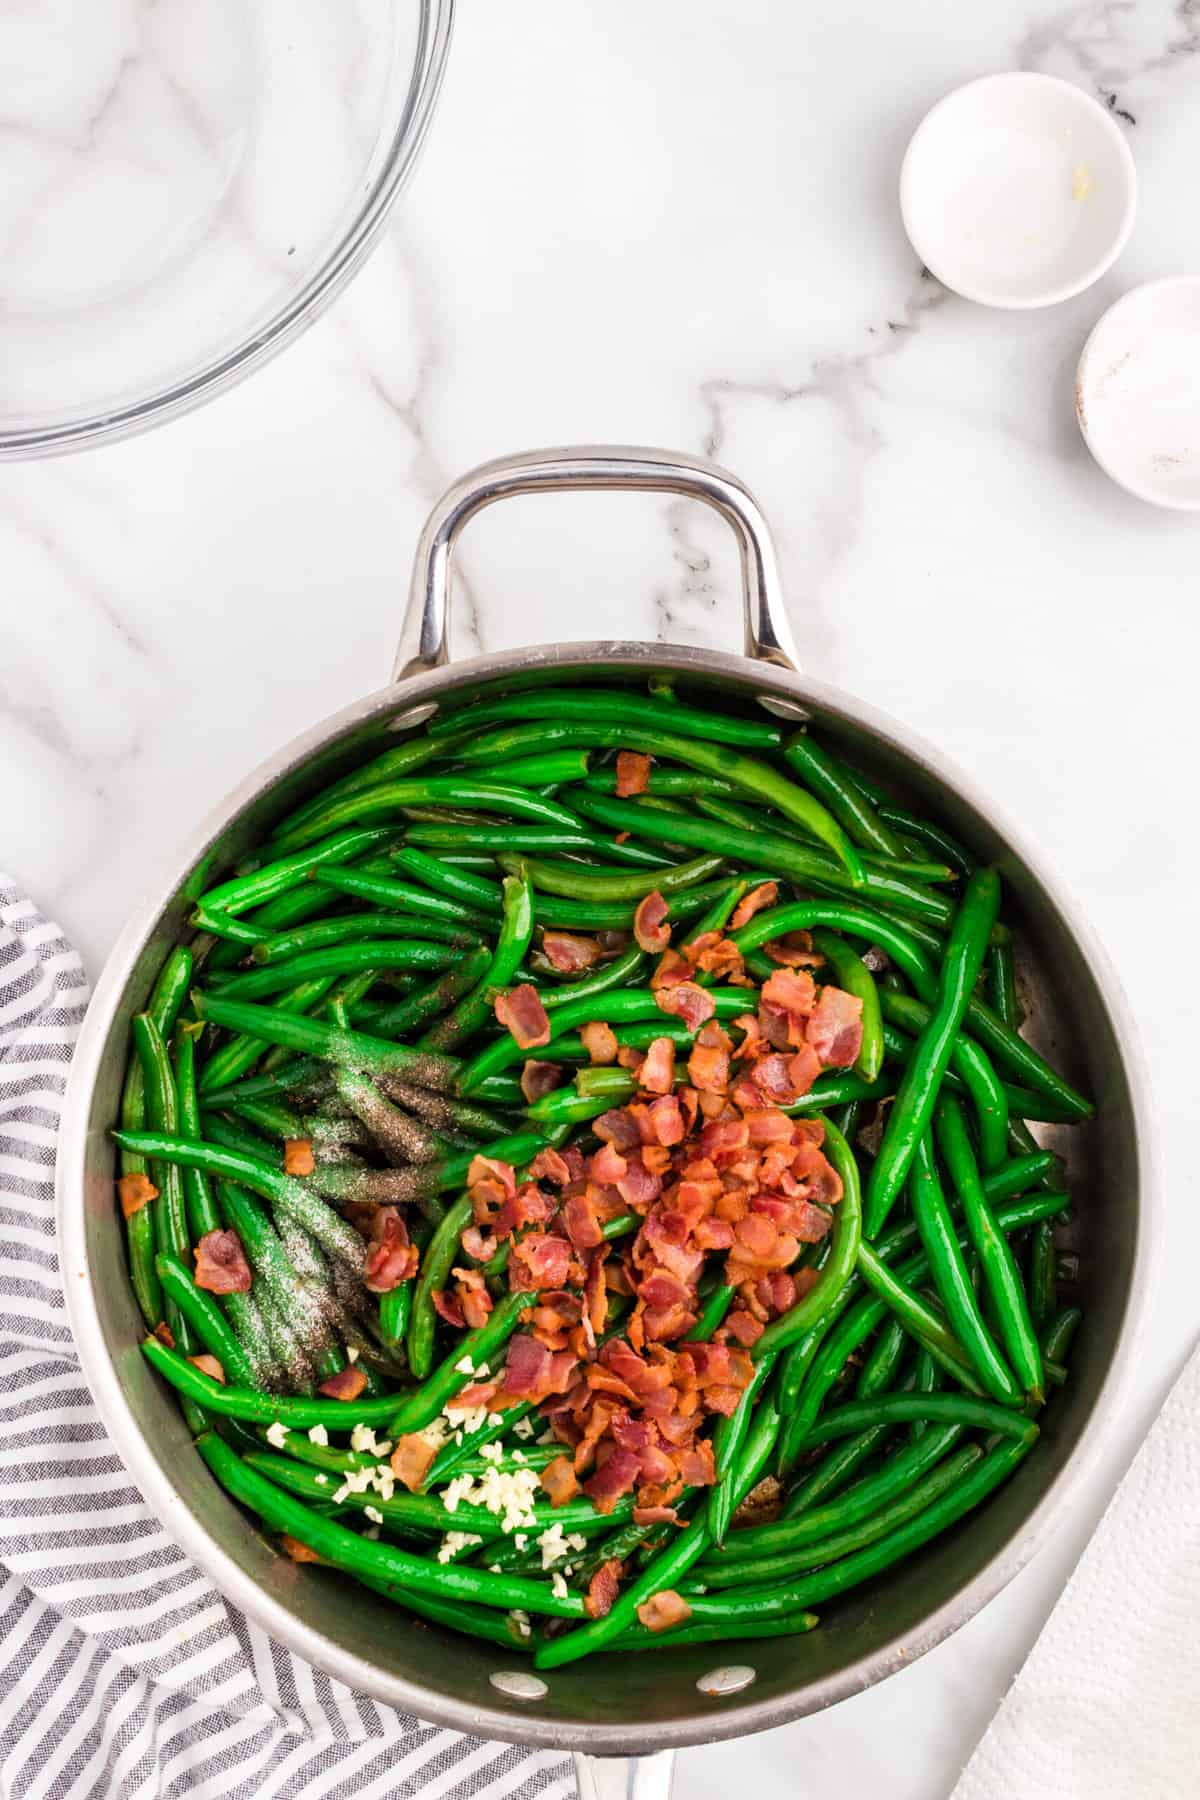 Adding cooked bacon, garlic, and seasonings to green beans in skillet for Green Beans with Bacon recipe